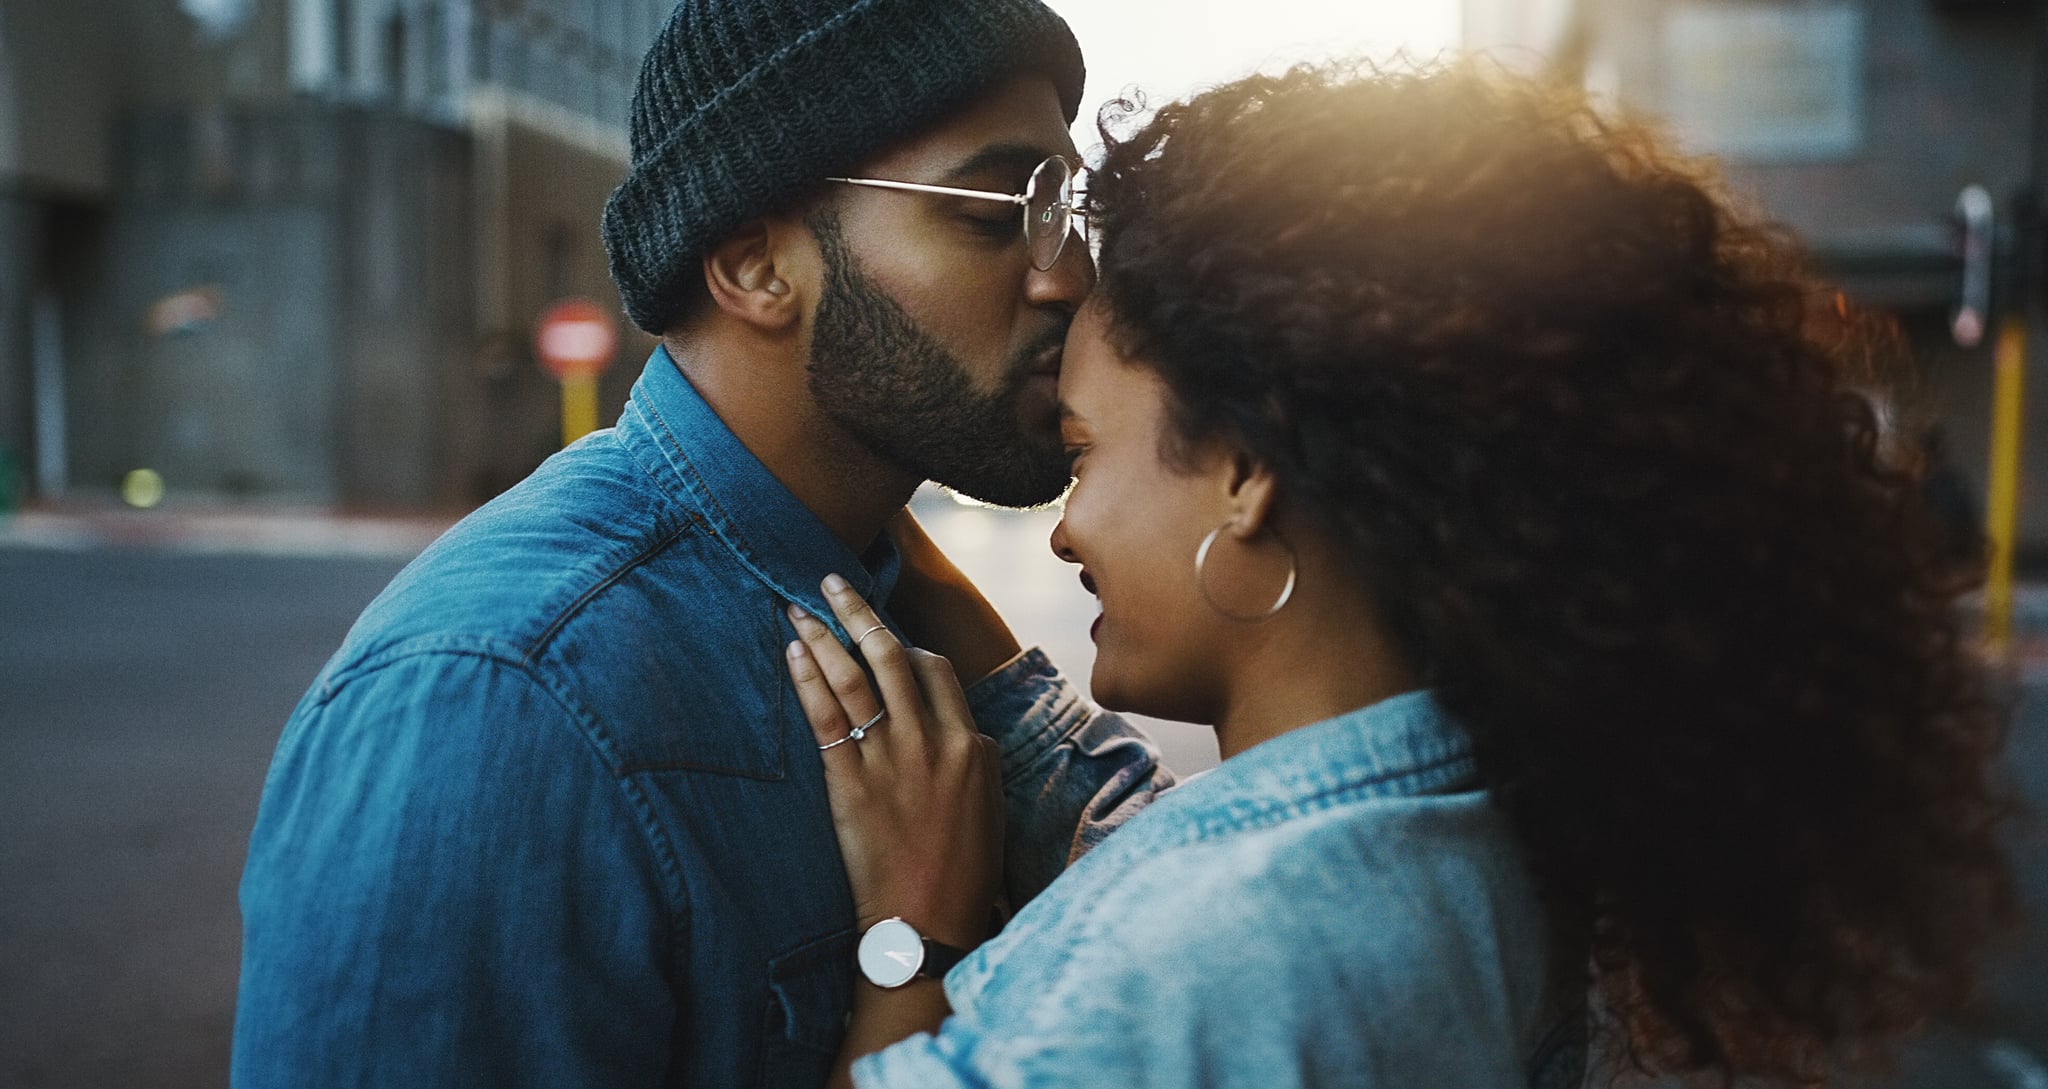 How To Have A Healthy Relationship Popsugar Love And Sex